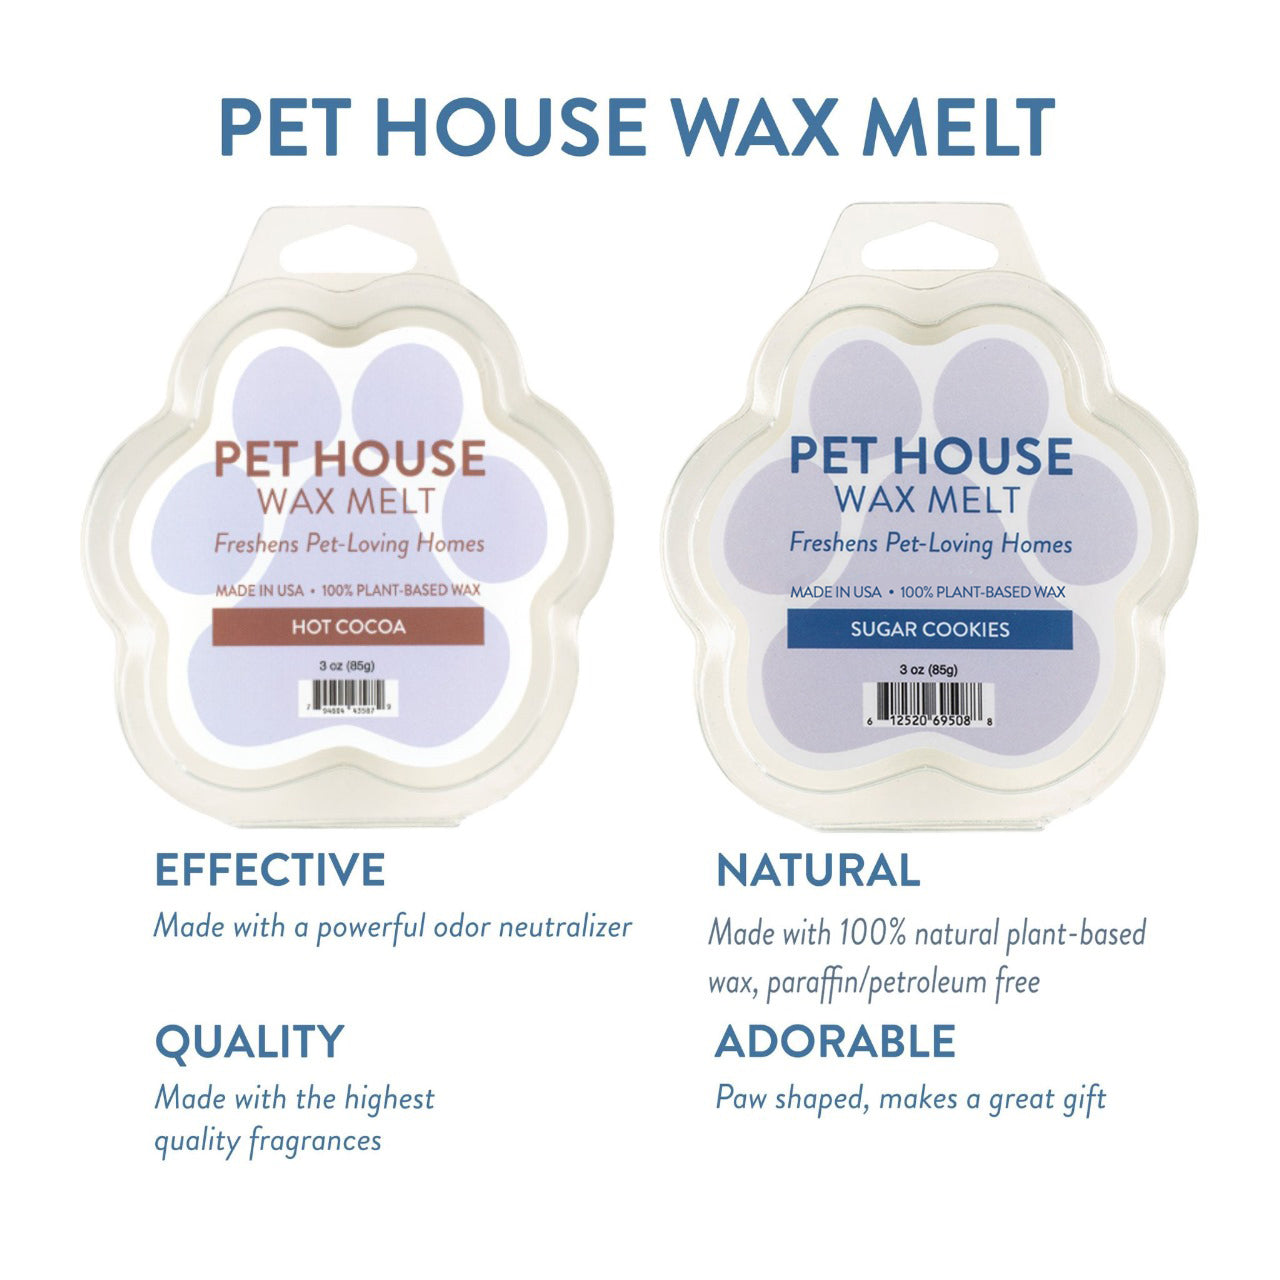 Hot Cocoa and Sugar Cookies - Pack of 2 Wax Melts infographics